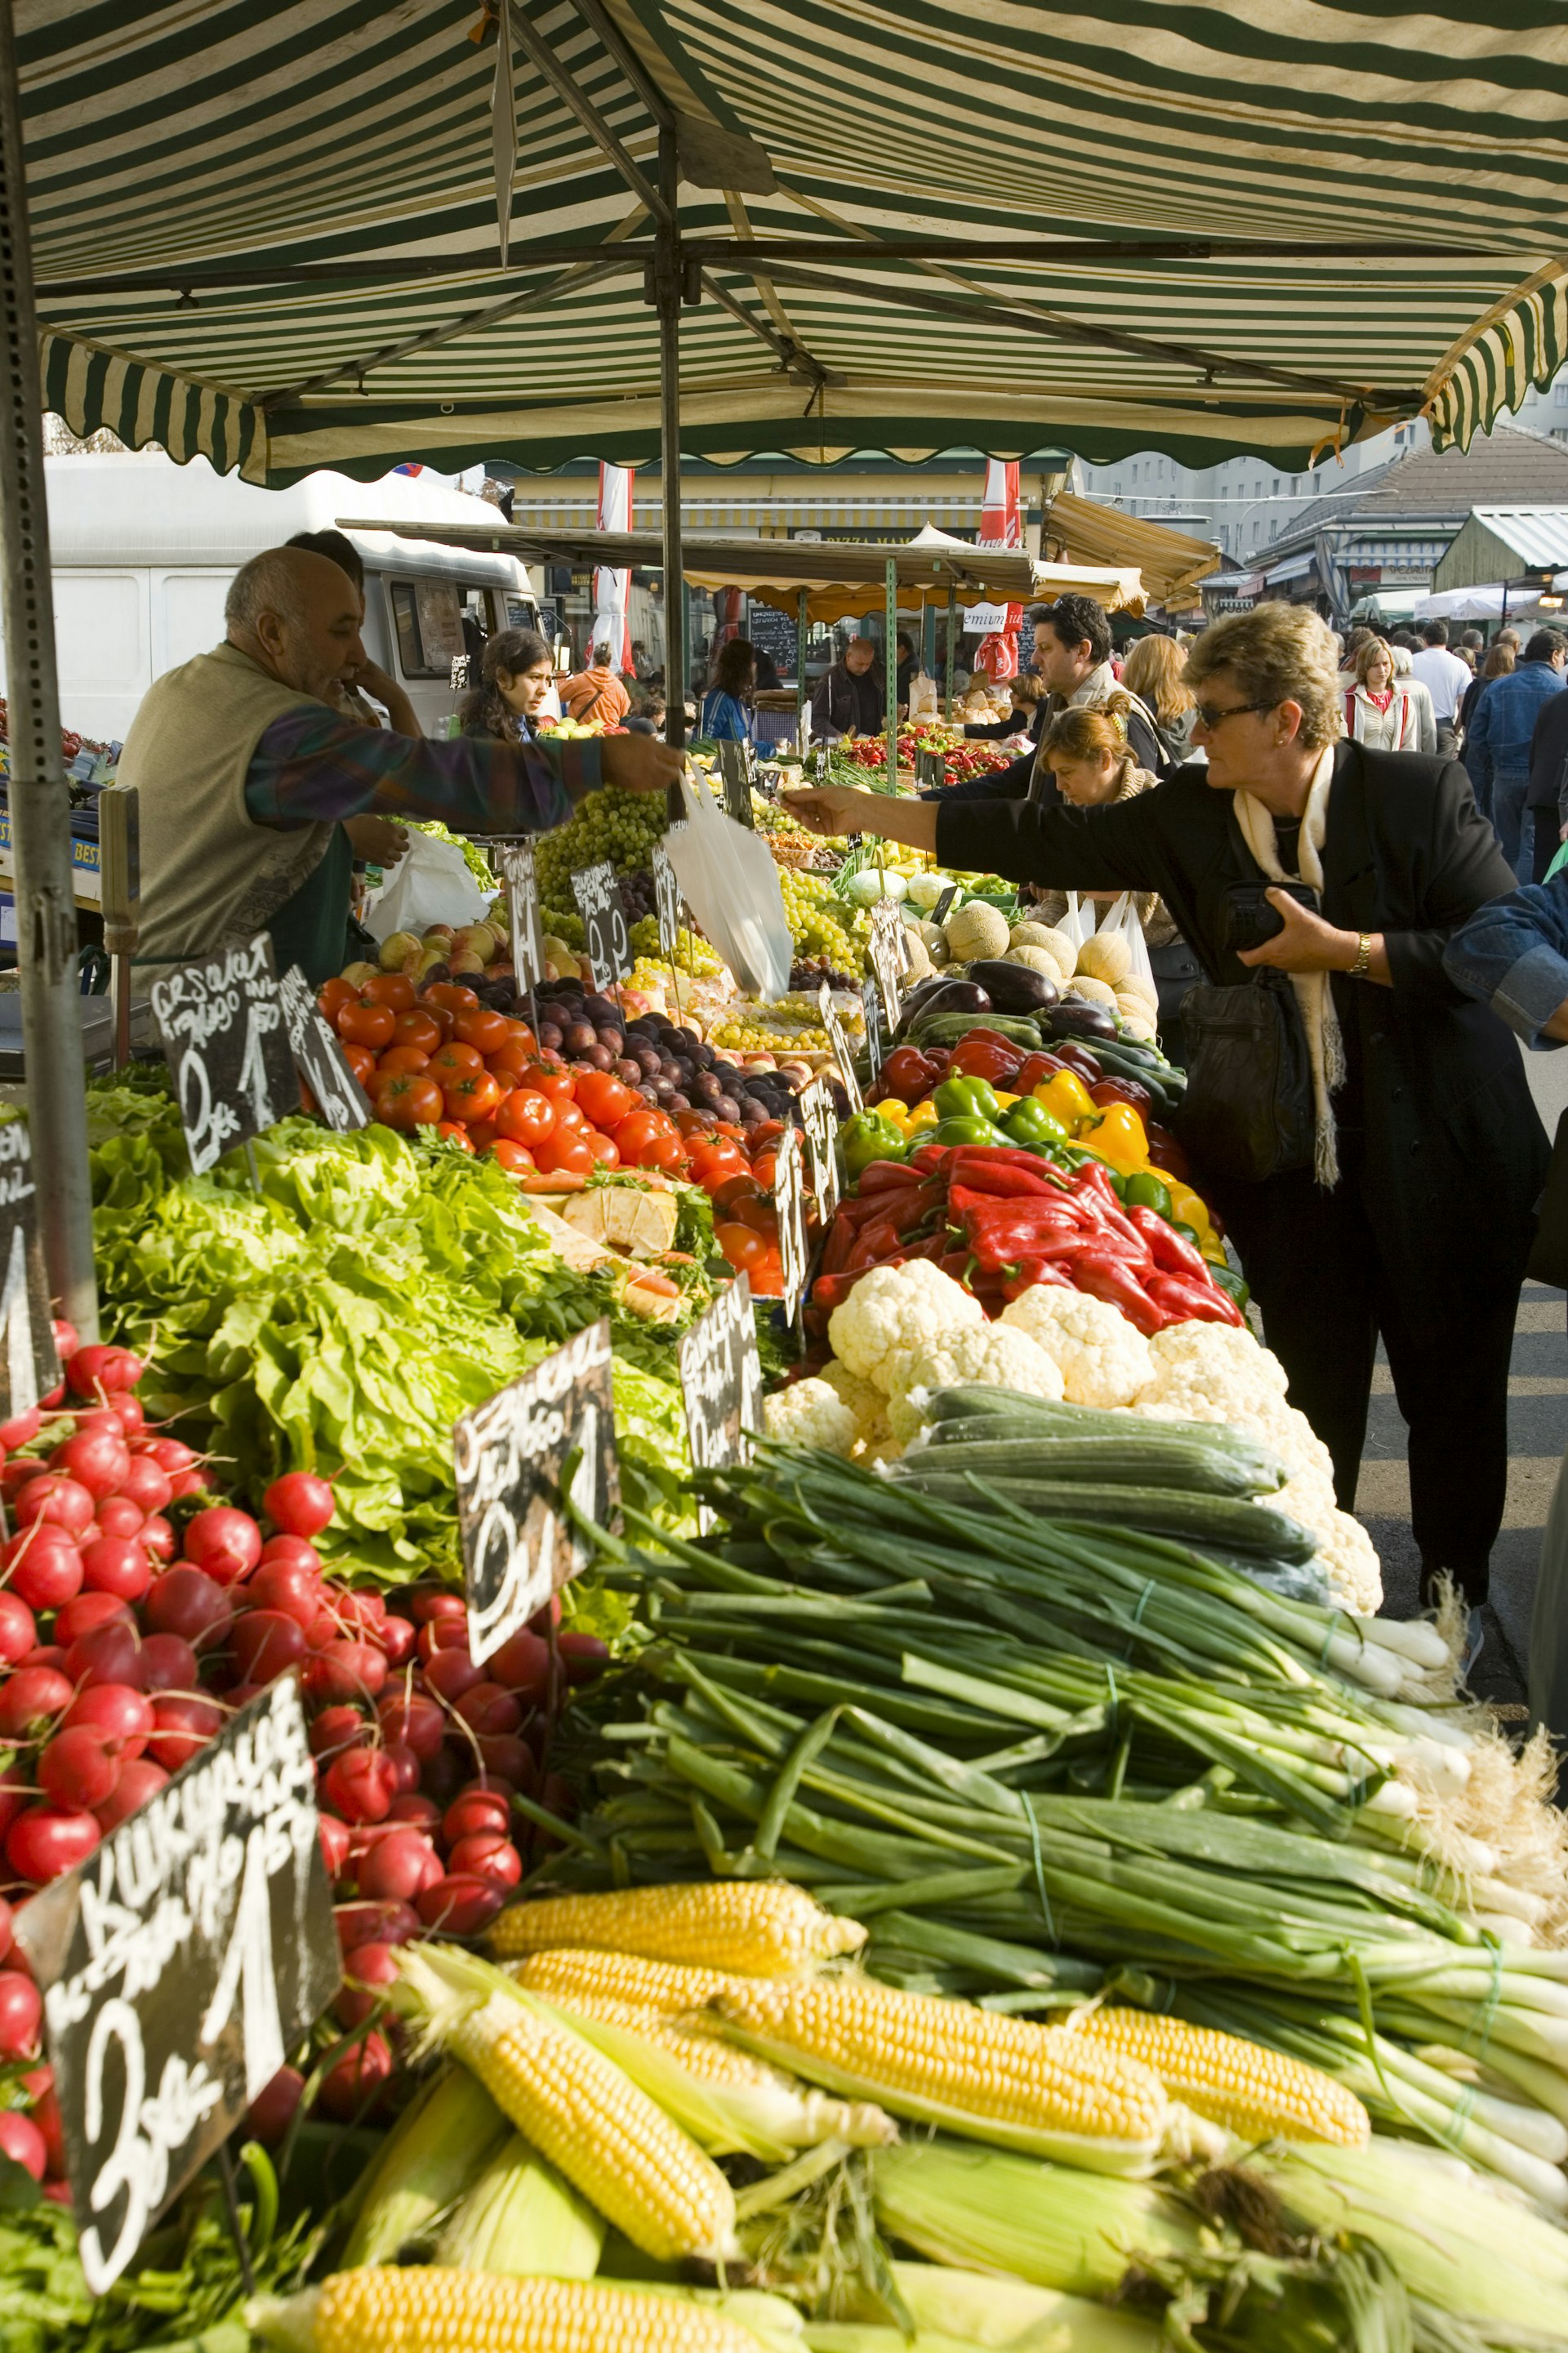 A woman is paying for produce at a market stall, which is laden with a huge variety of fresh vegetables, such as corn cobs, radishes and lettuce.